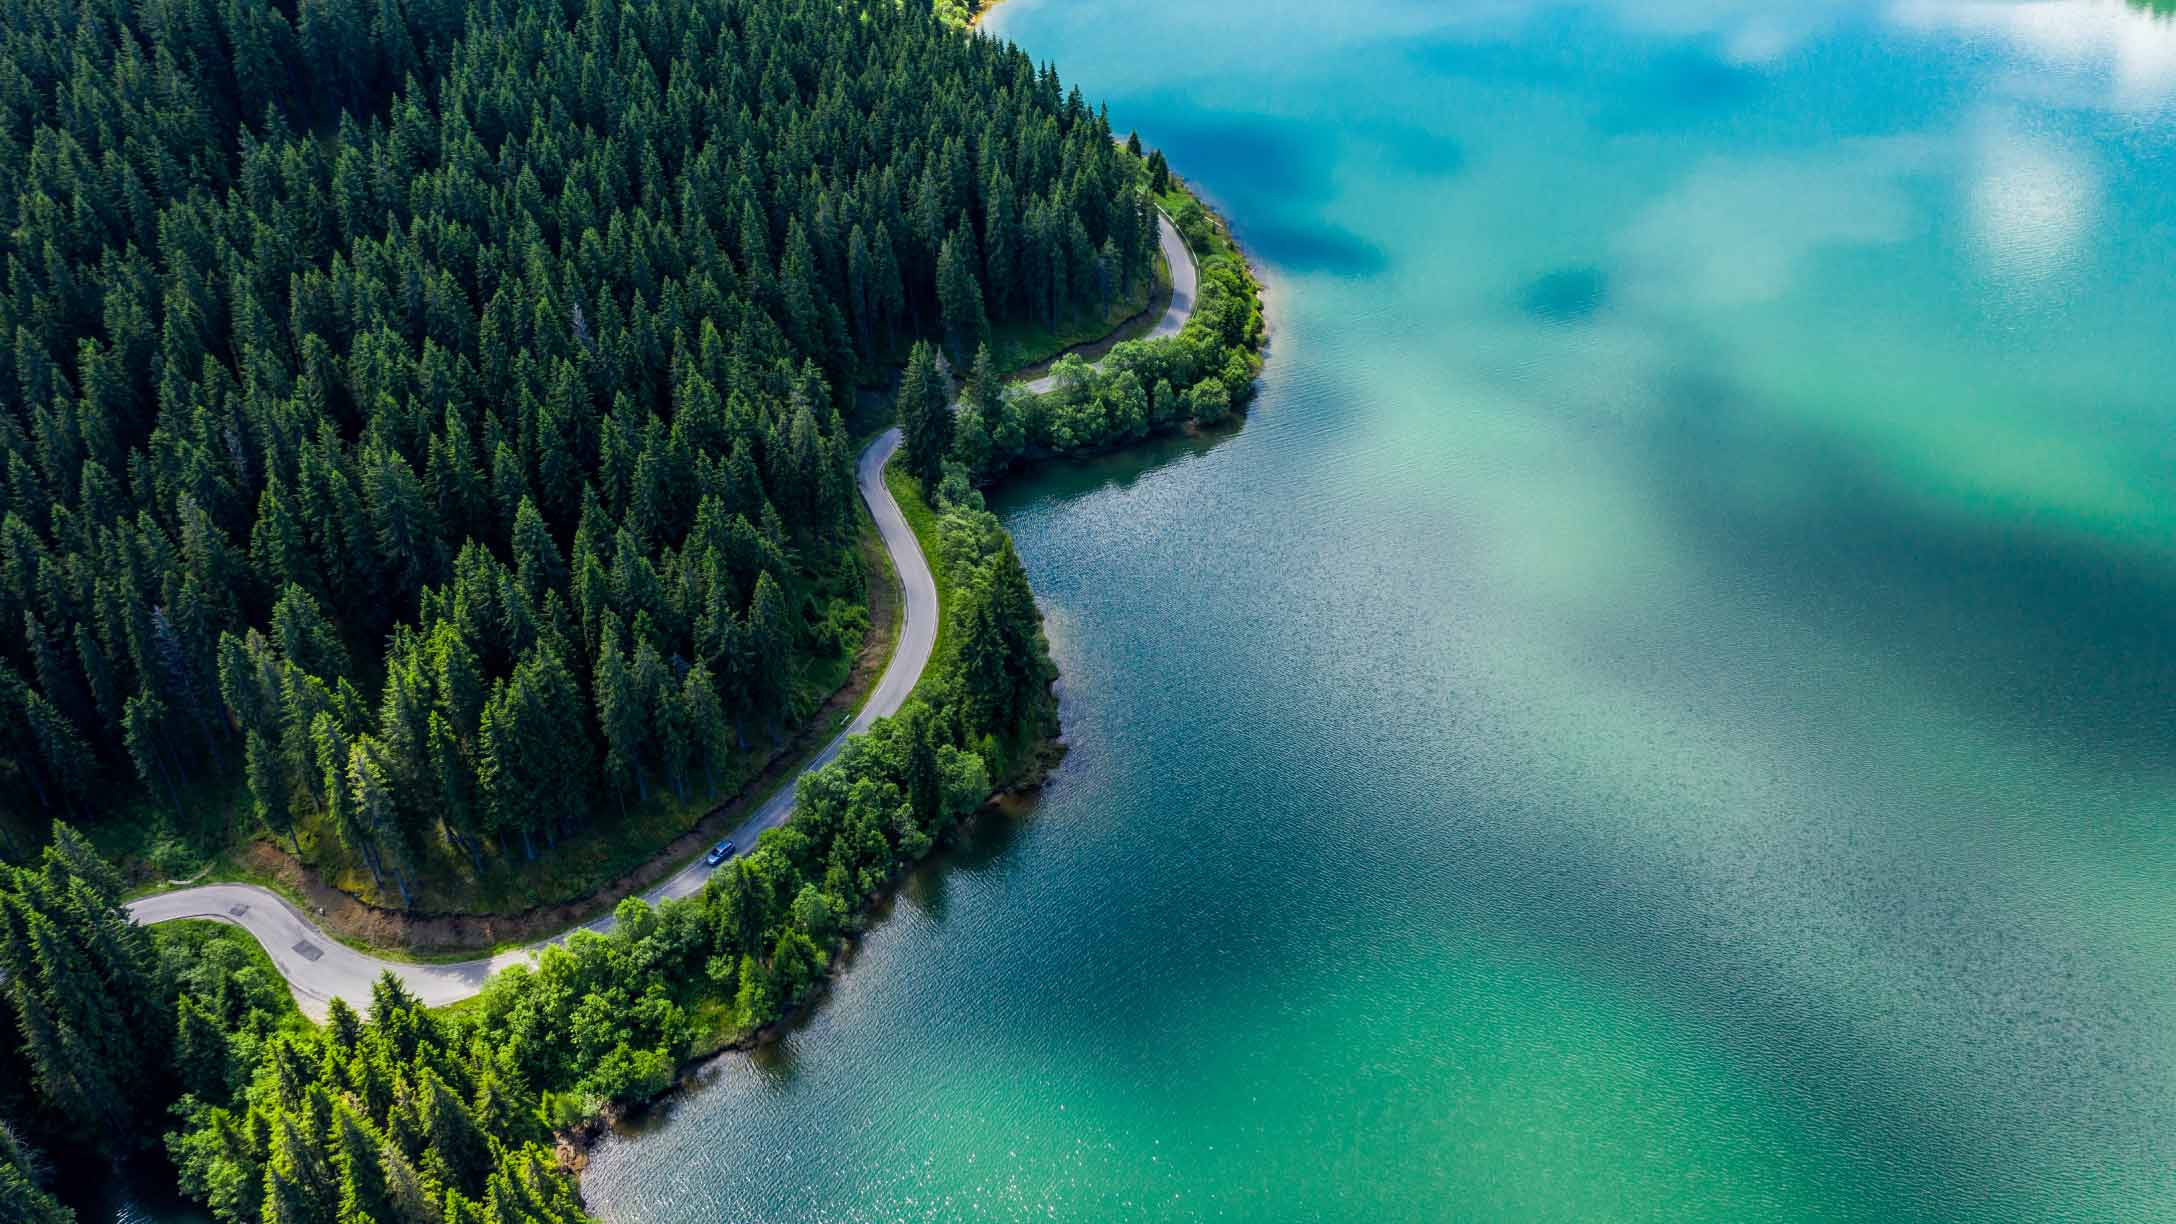 Birdseye view of a vehicle driving alongside forested terrain and a lake